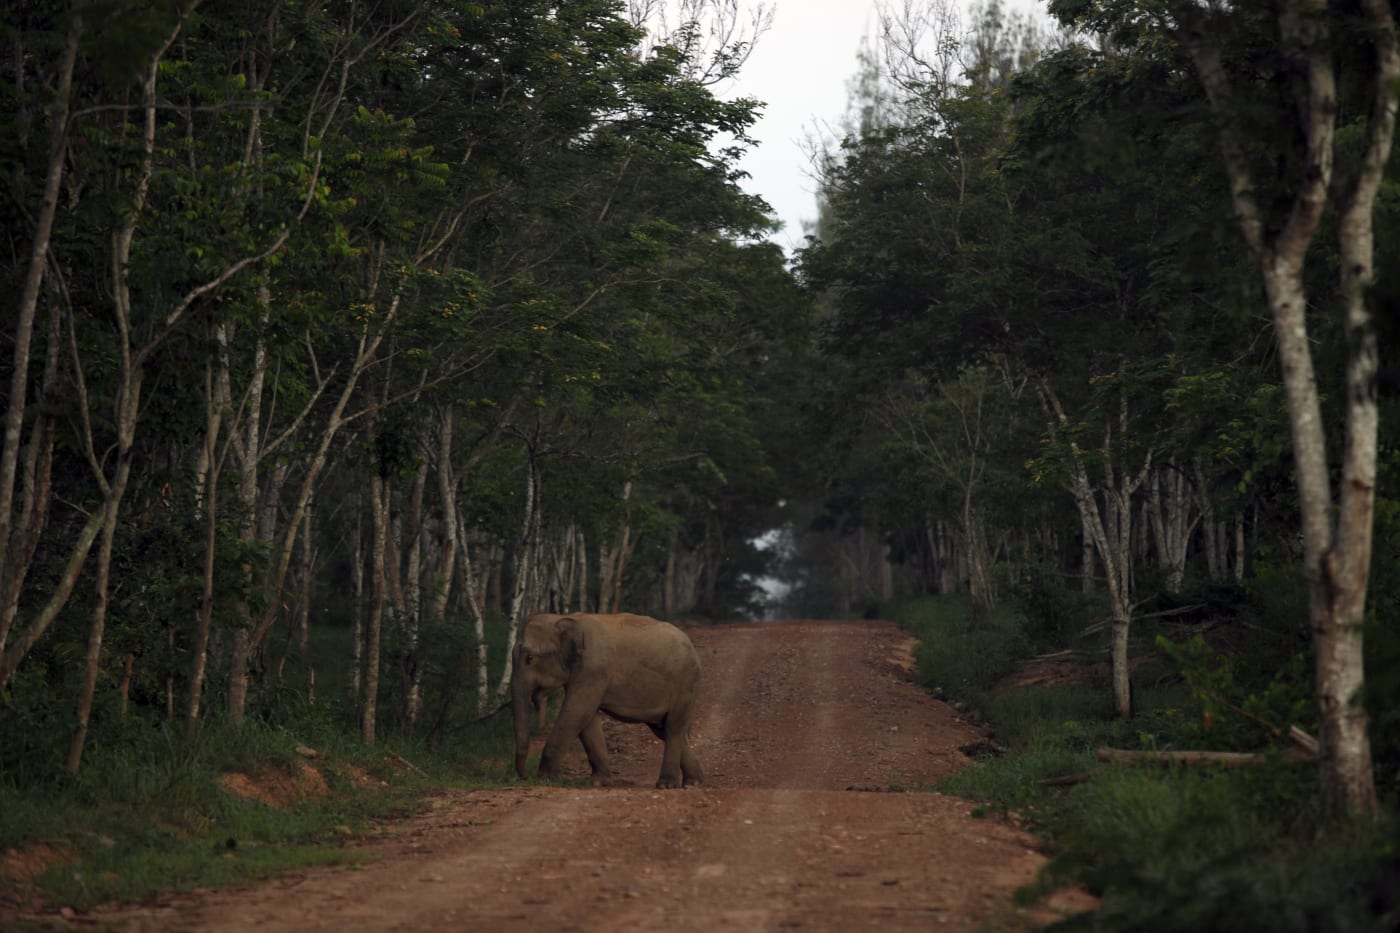 A lone Asian elephant walks along a road in the forest in Kui Buri National Park in Thailand's Prachuap Kiri Khan Province.